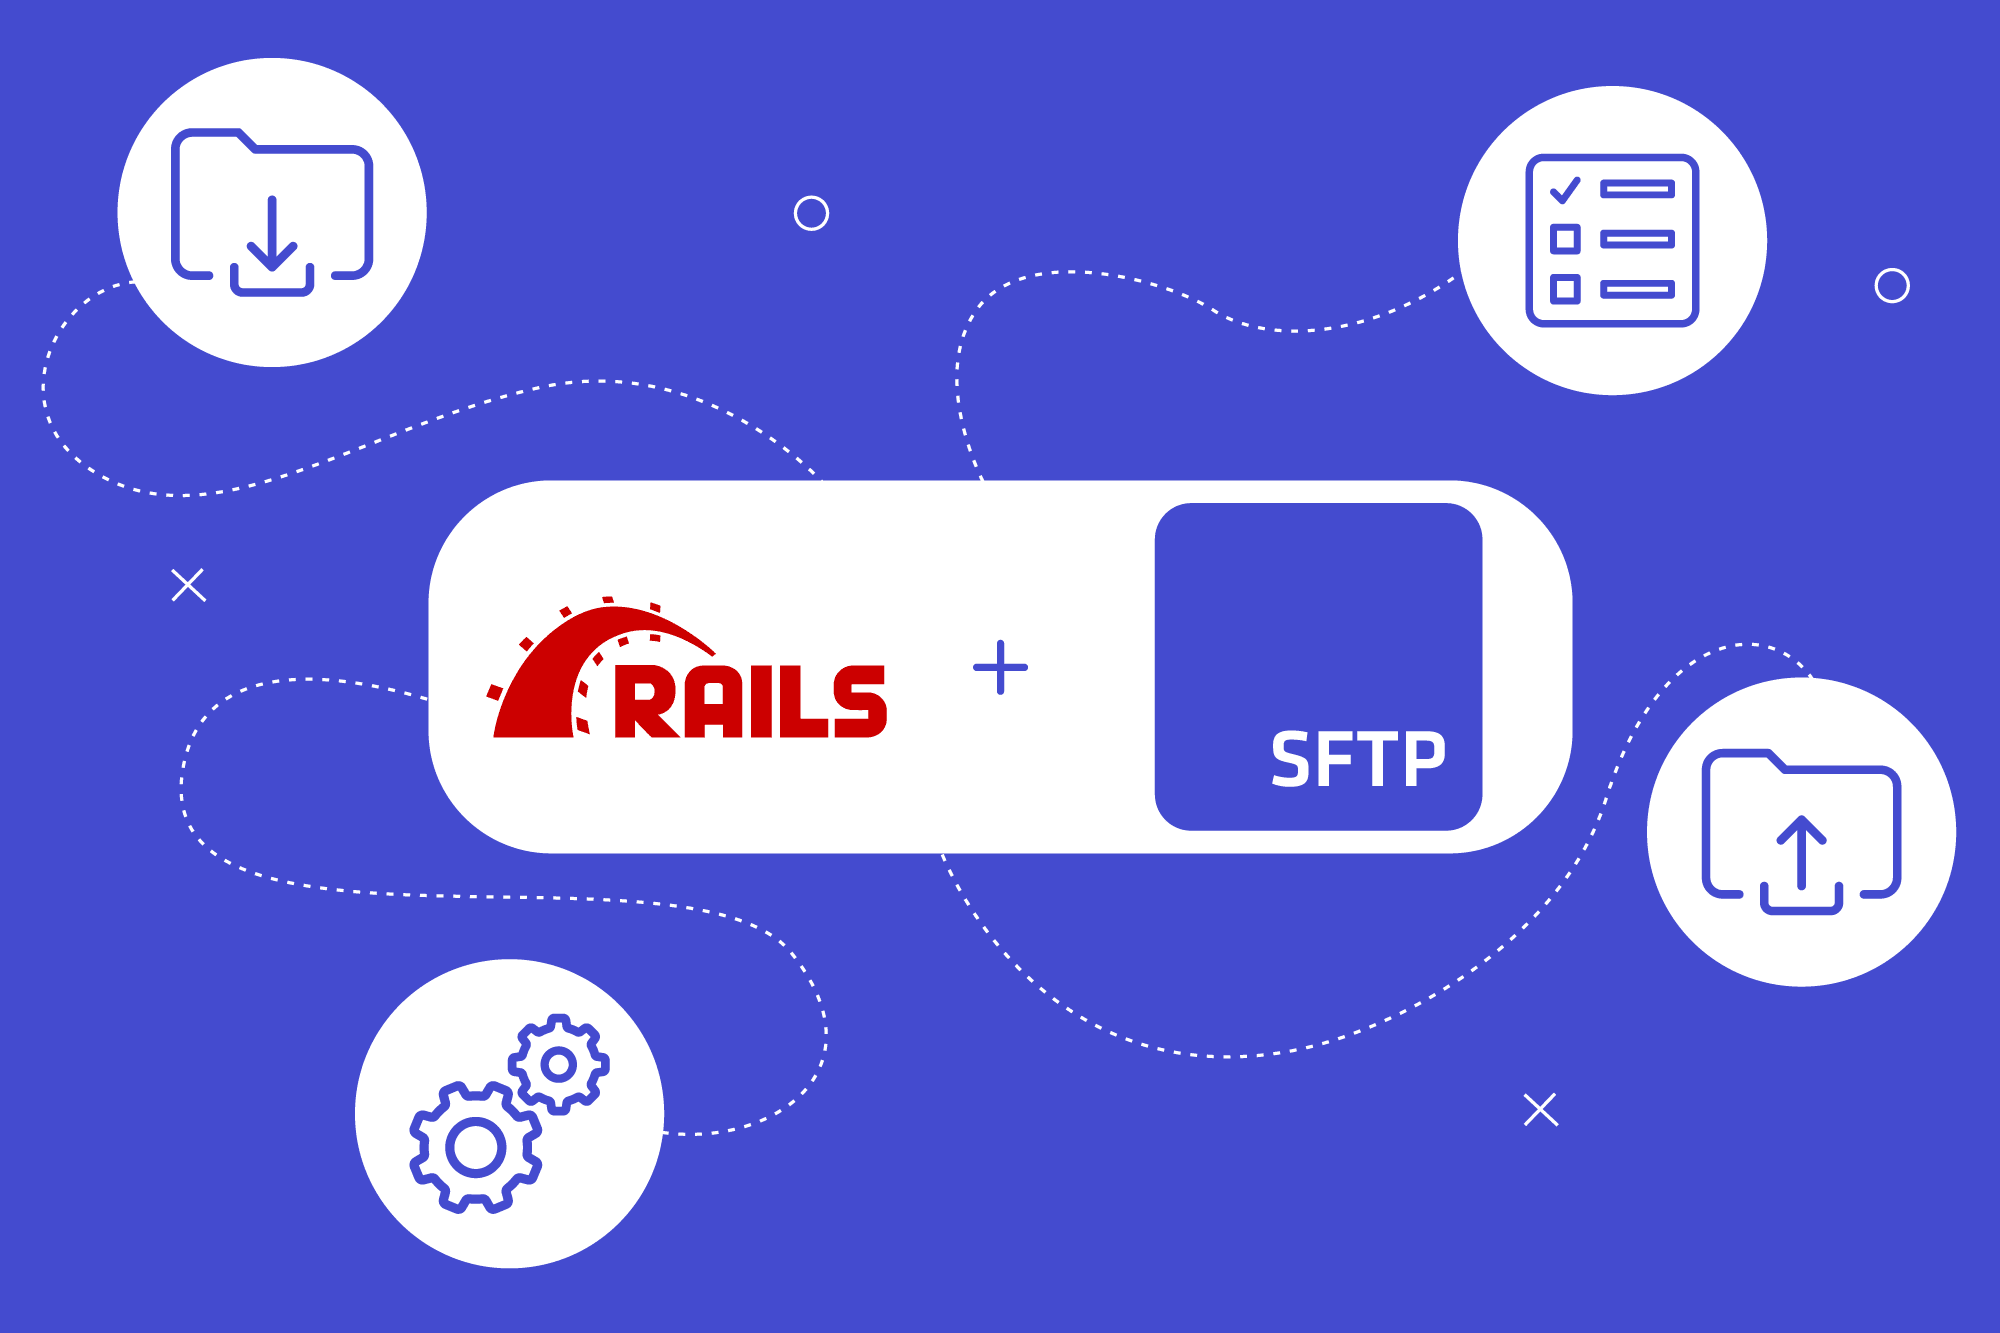 How to connect to SFTP in Ruby on Rails